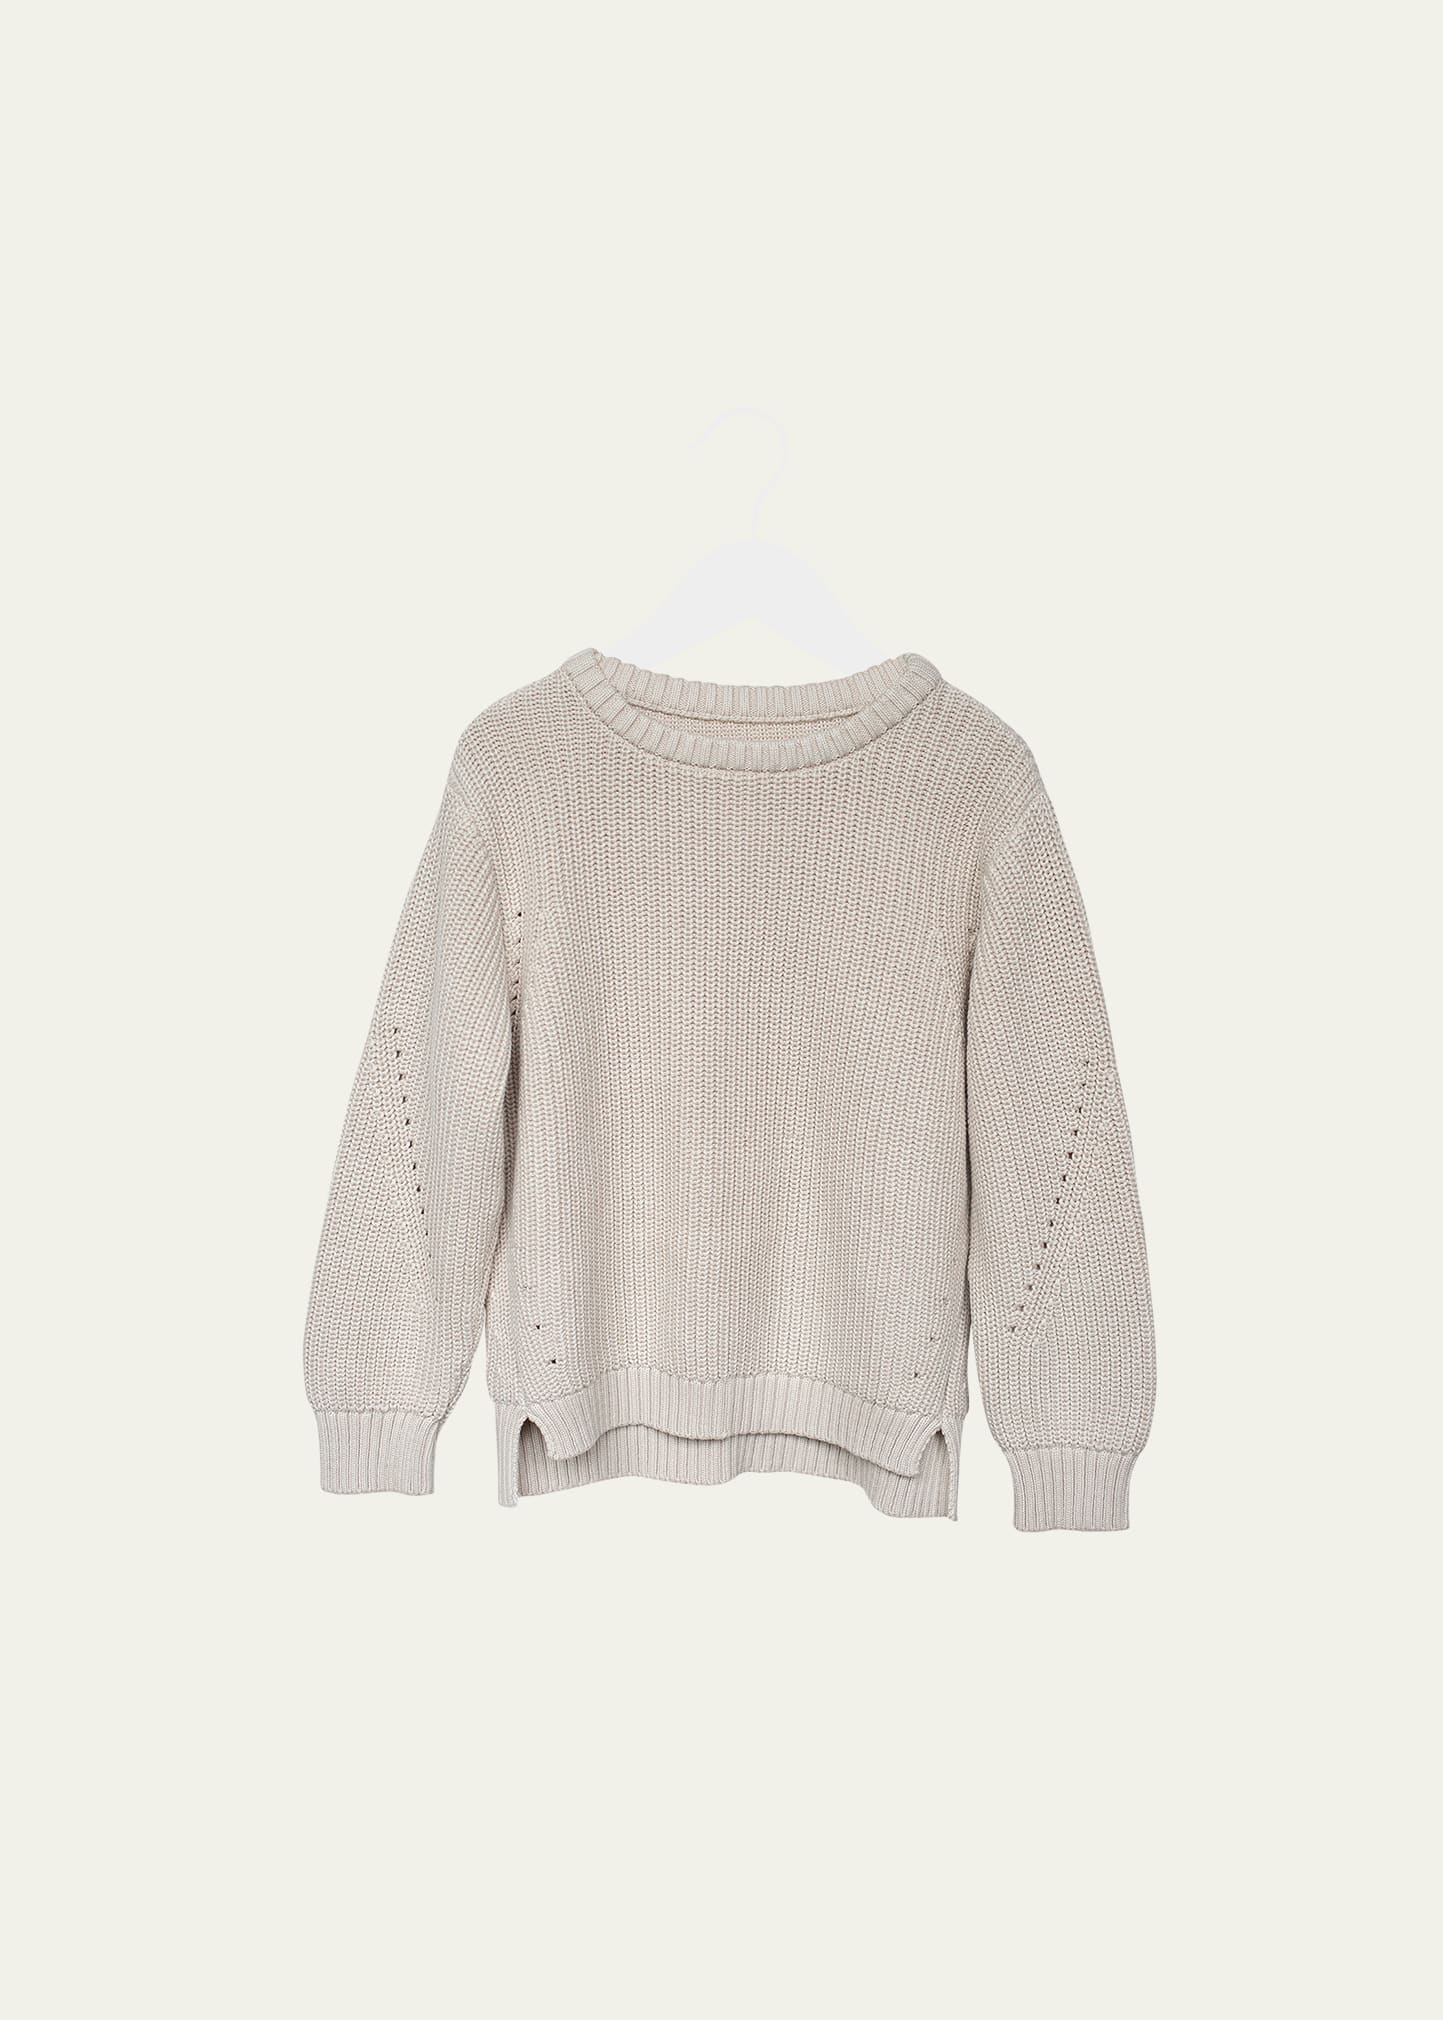 The Simple Folk Child Boy And Child Girl Organic Cotton Essential Sweater In Oatmeal